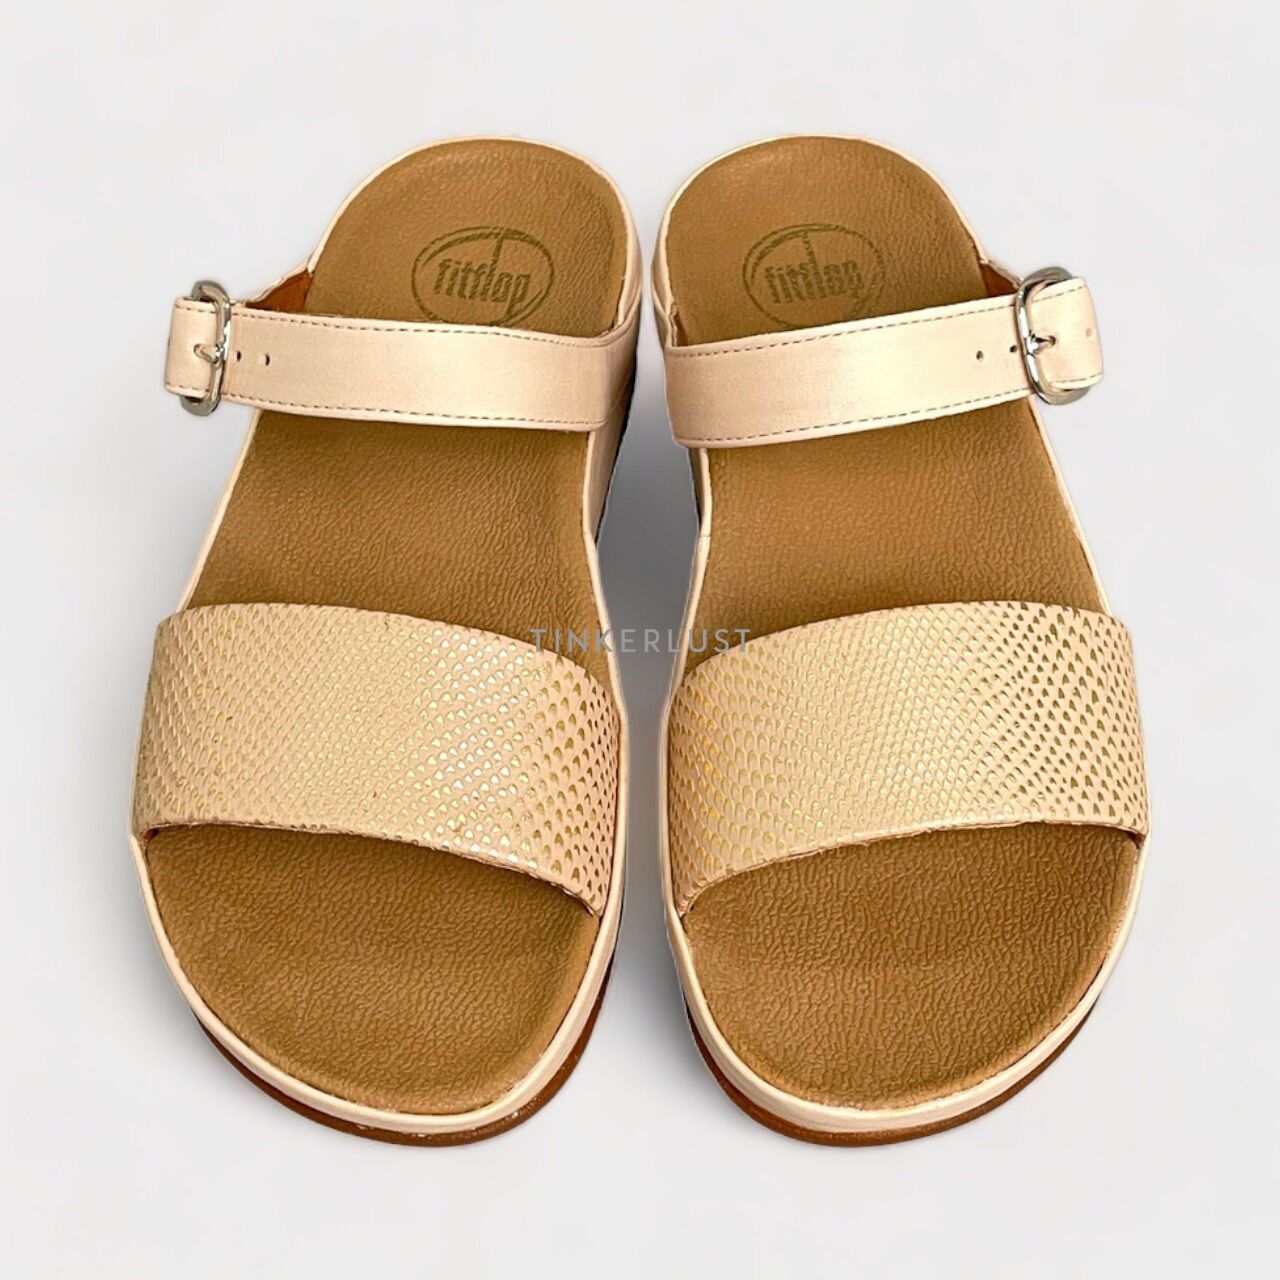 Fitflop Nude Sandals